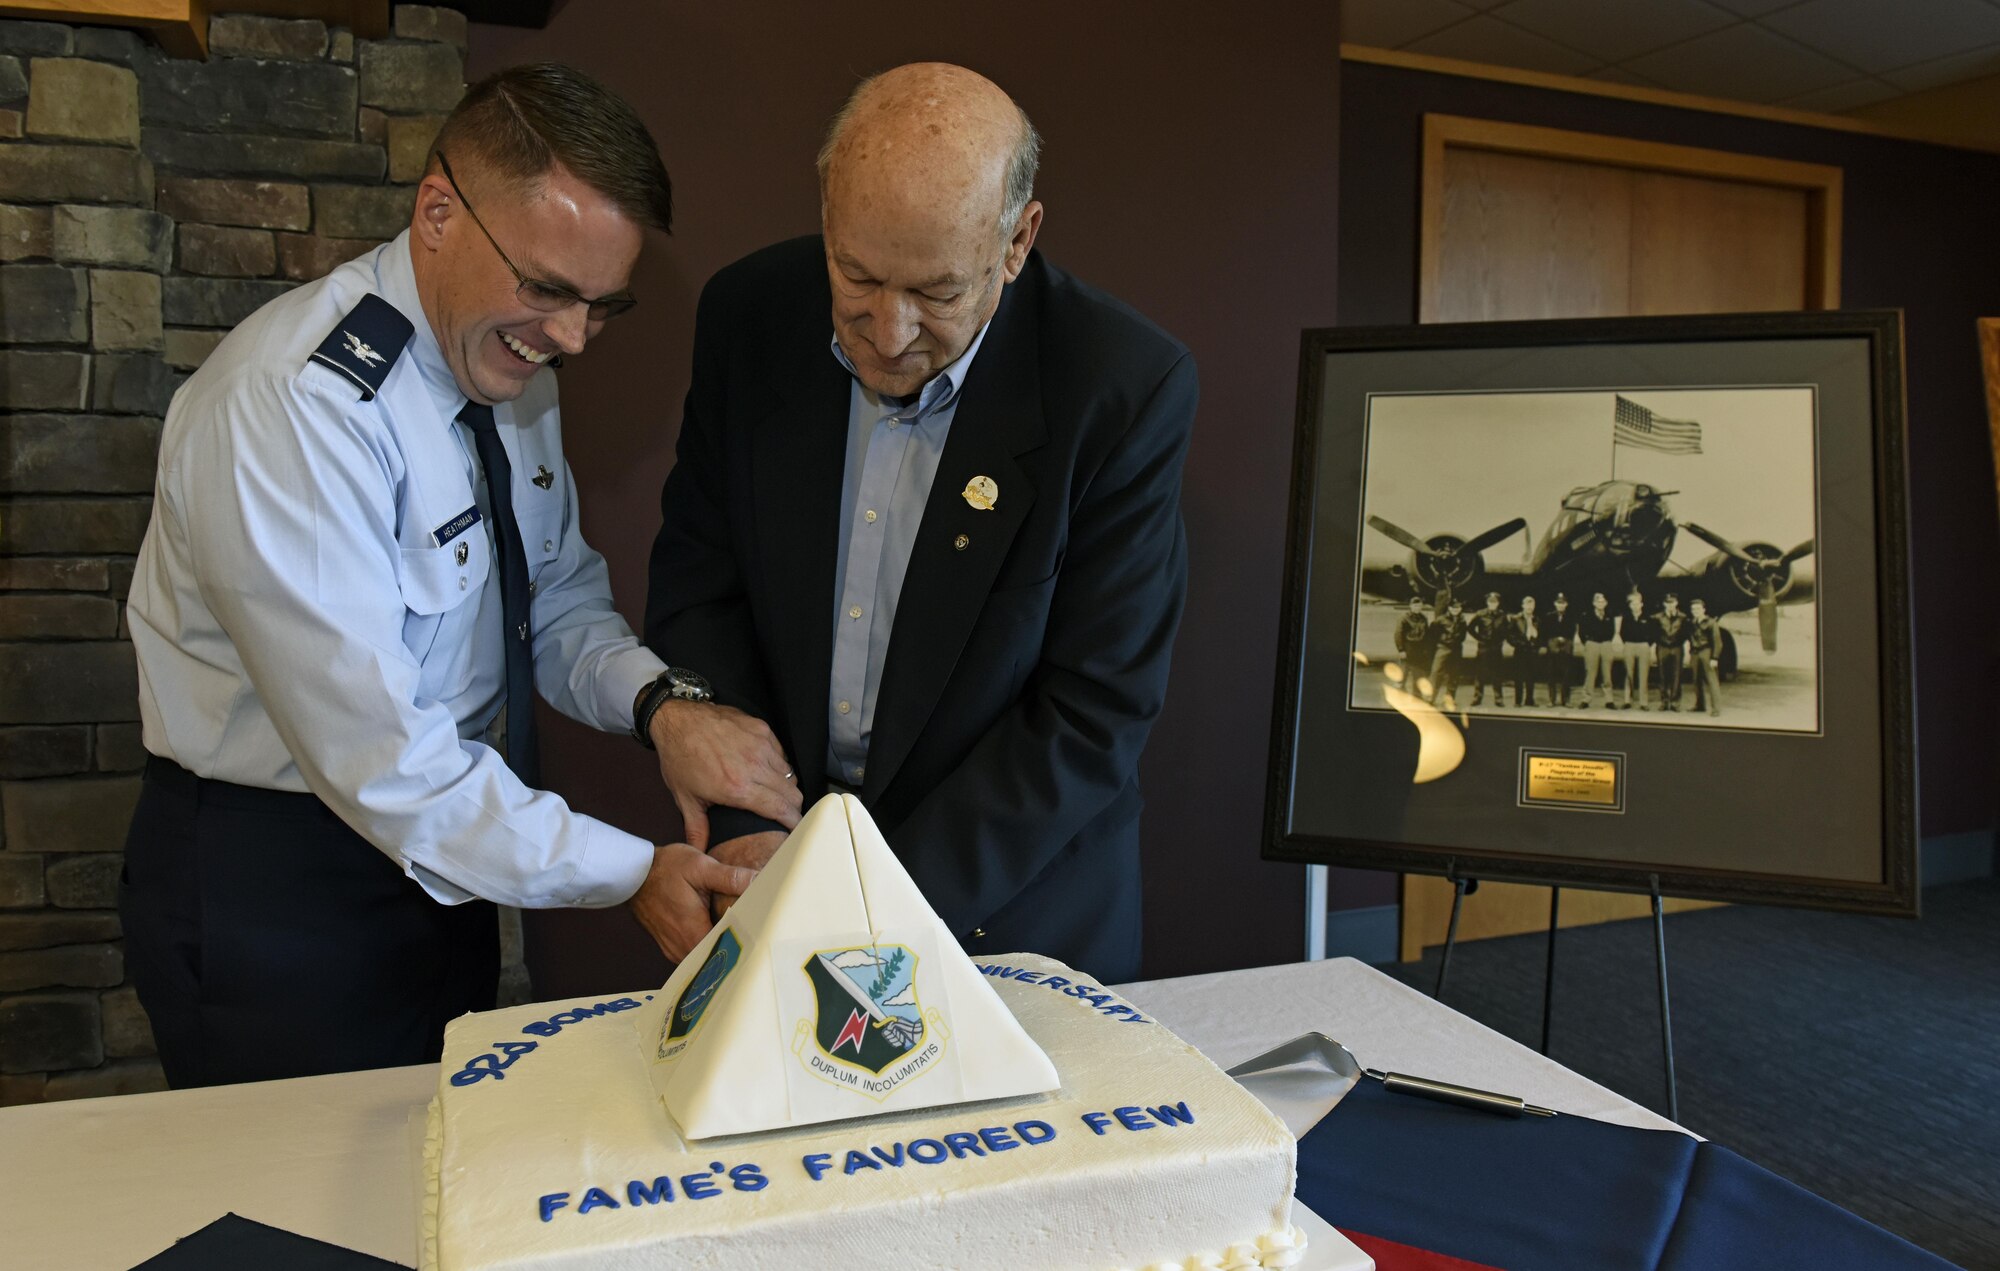 (left) Colonel J. Scot Heathman, 92nd Air Refueling Wing vice commander, and (right) Duane Wolfe, 92nd ARW Memorial Association president, cut a cake to commemorate the wing’s 70th anniversary at Fairchild Air force Base, Wash., Nov. 17, 2017. The 92nd ARW has proven critical to fulfilling U.S. Strategic Command’s vision of fighting and delivering integrated, multi-domain combat effects across the globe, wherever and whenever needed. (U.S. Air Force photo /Airman 1st Class Jesenia Landaverde)